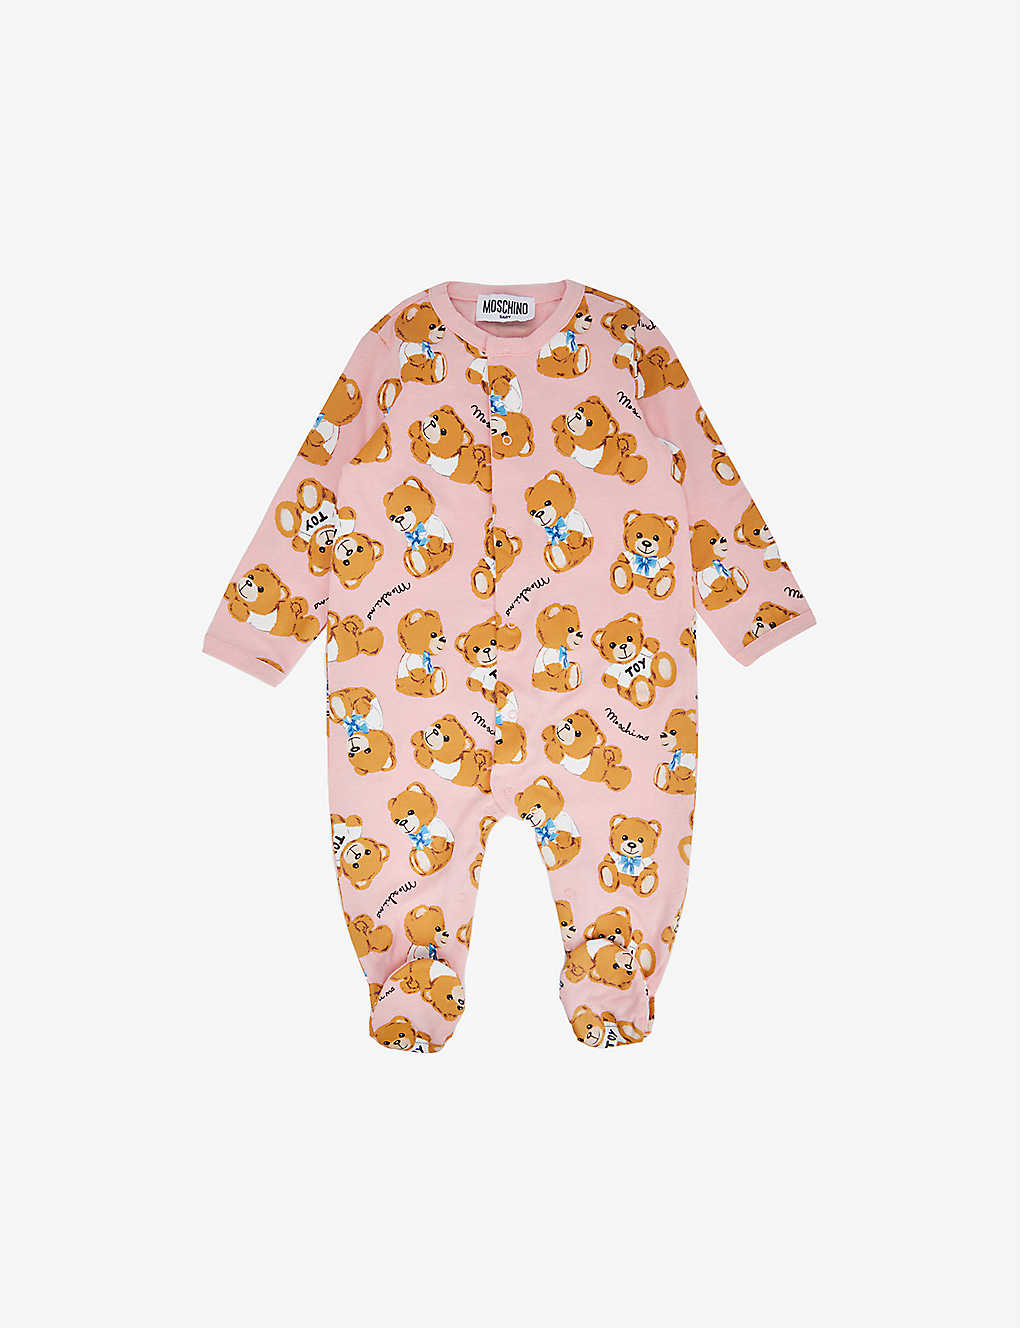 Selfridges & Co Clothing Loungewear Sleepsuits Toy Bear cotton-jersey baby grow 1-18 months 